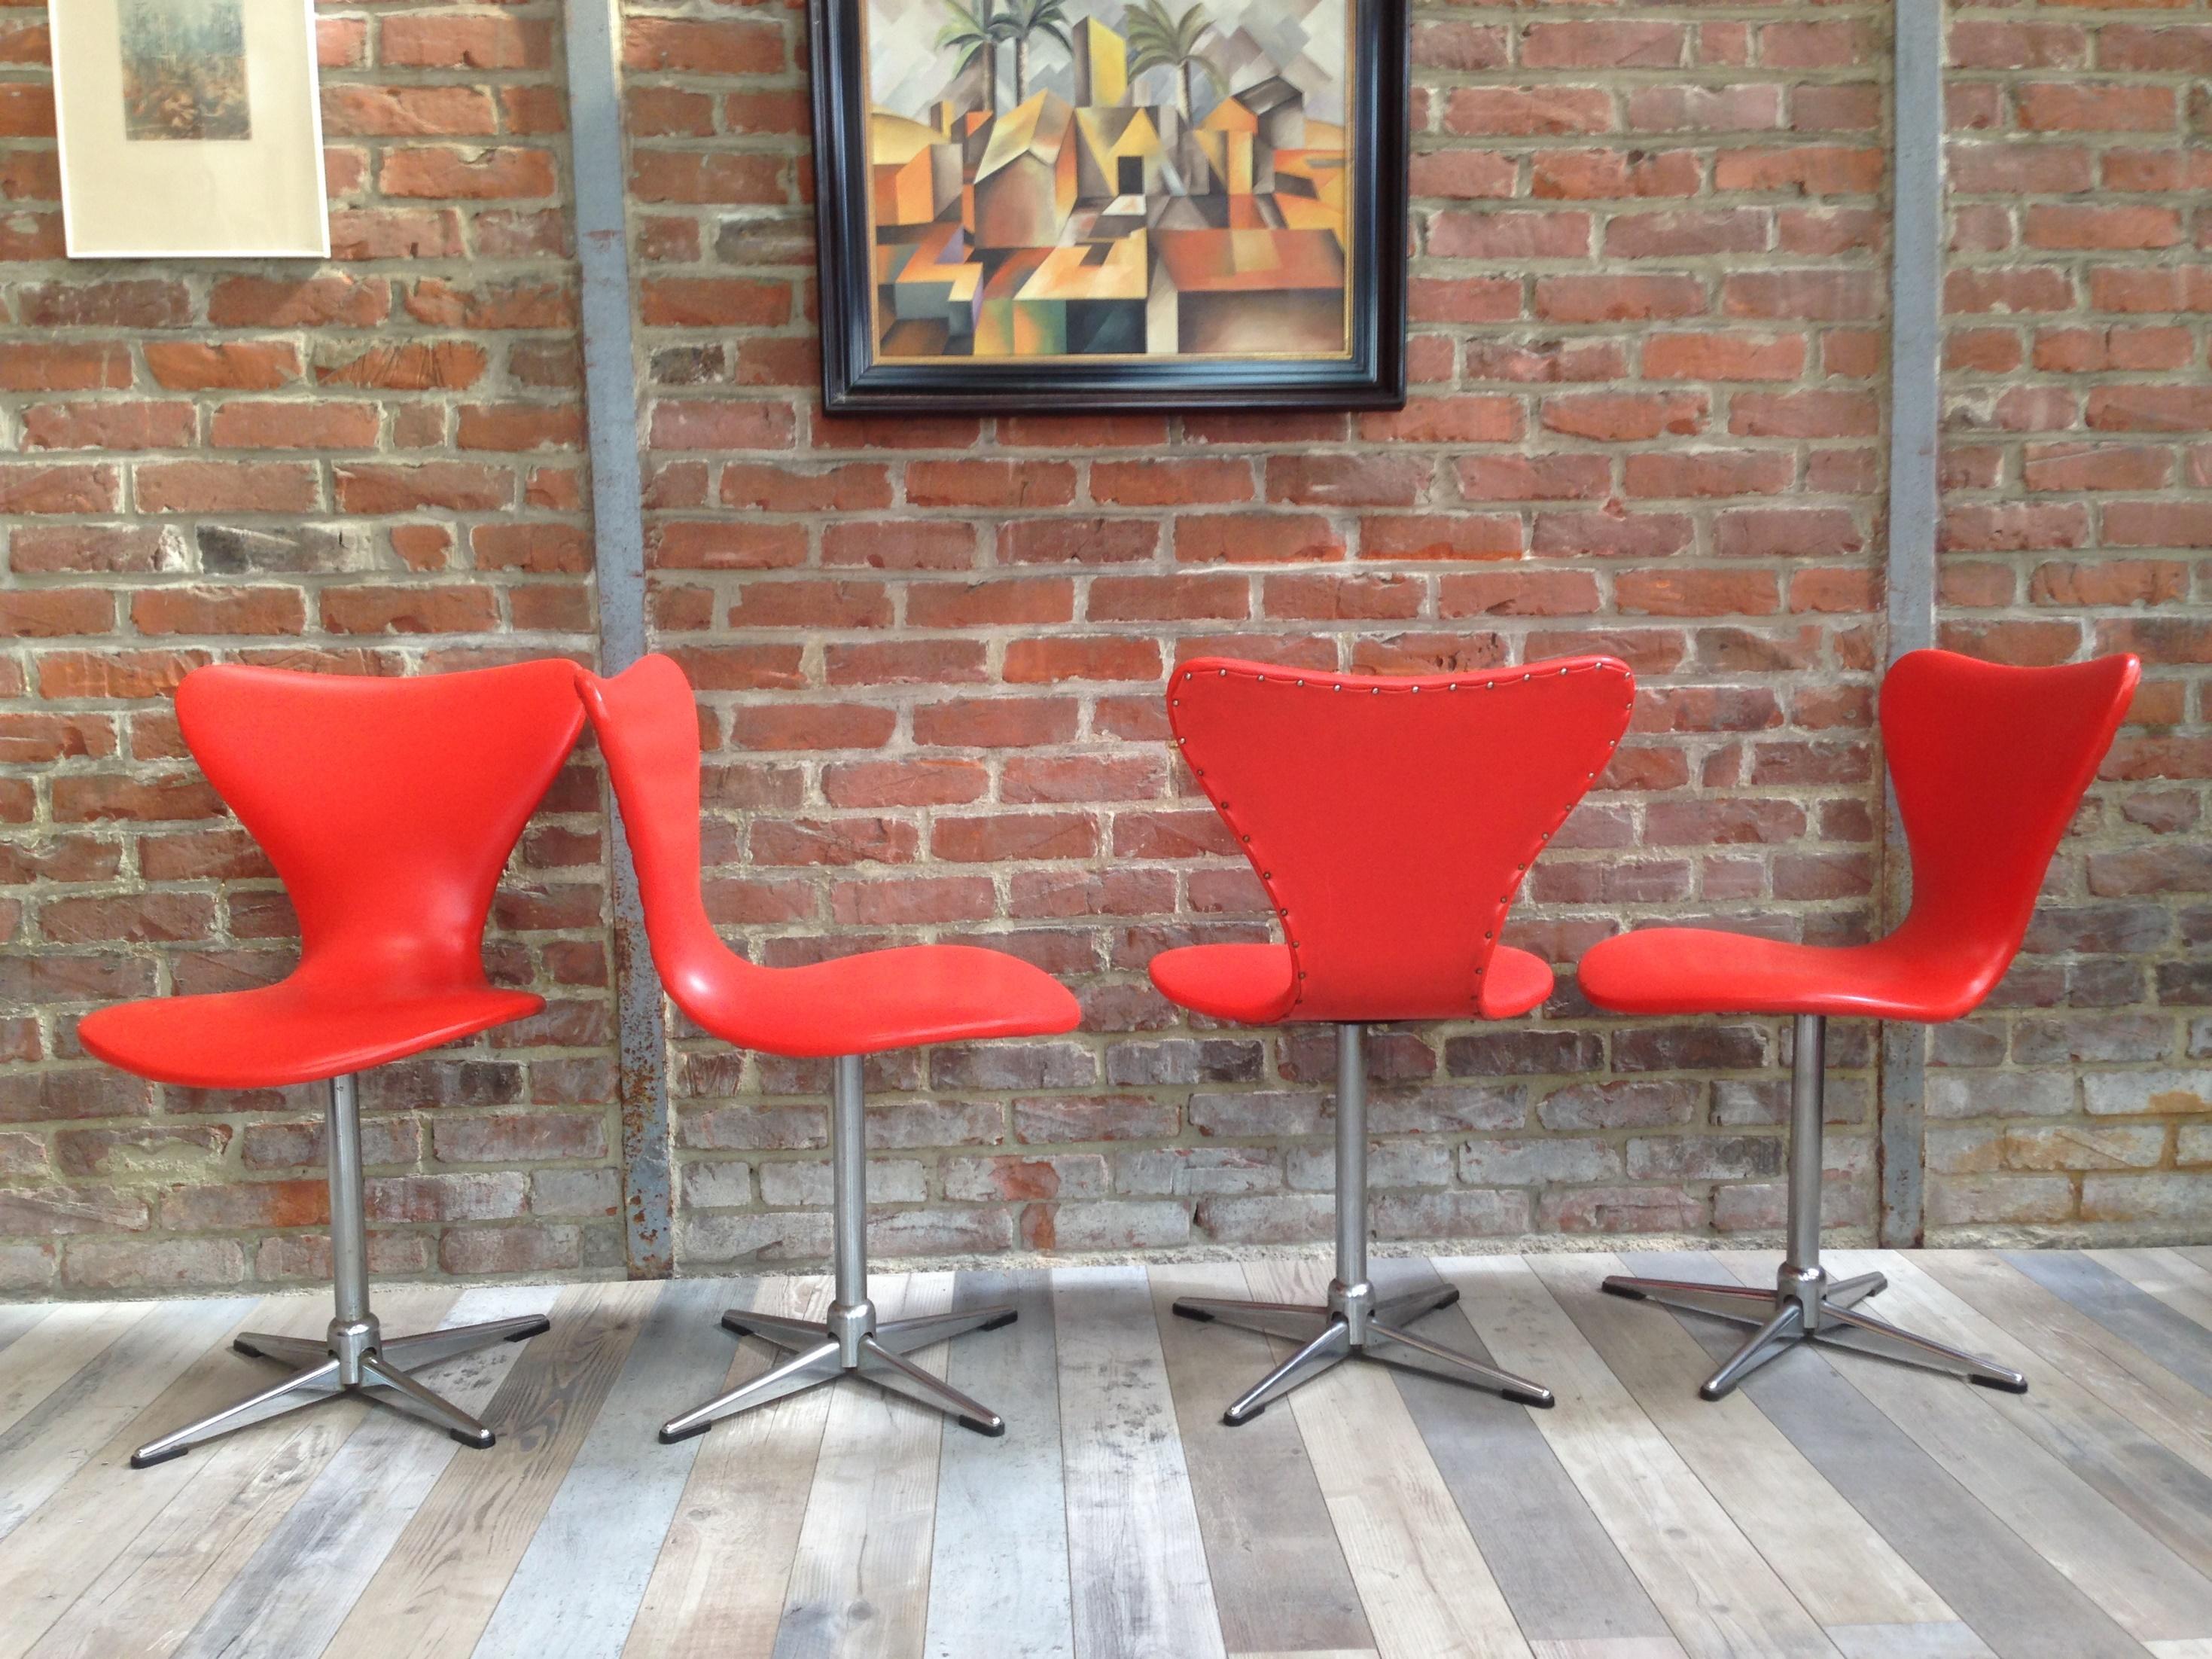 Vintage look, ultra design and orange PoP color, these 4 1960s chairs are swivel. Their shells, recalling the work of the famous 